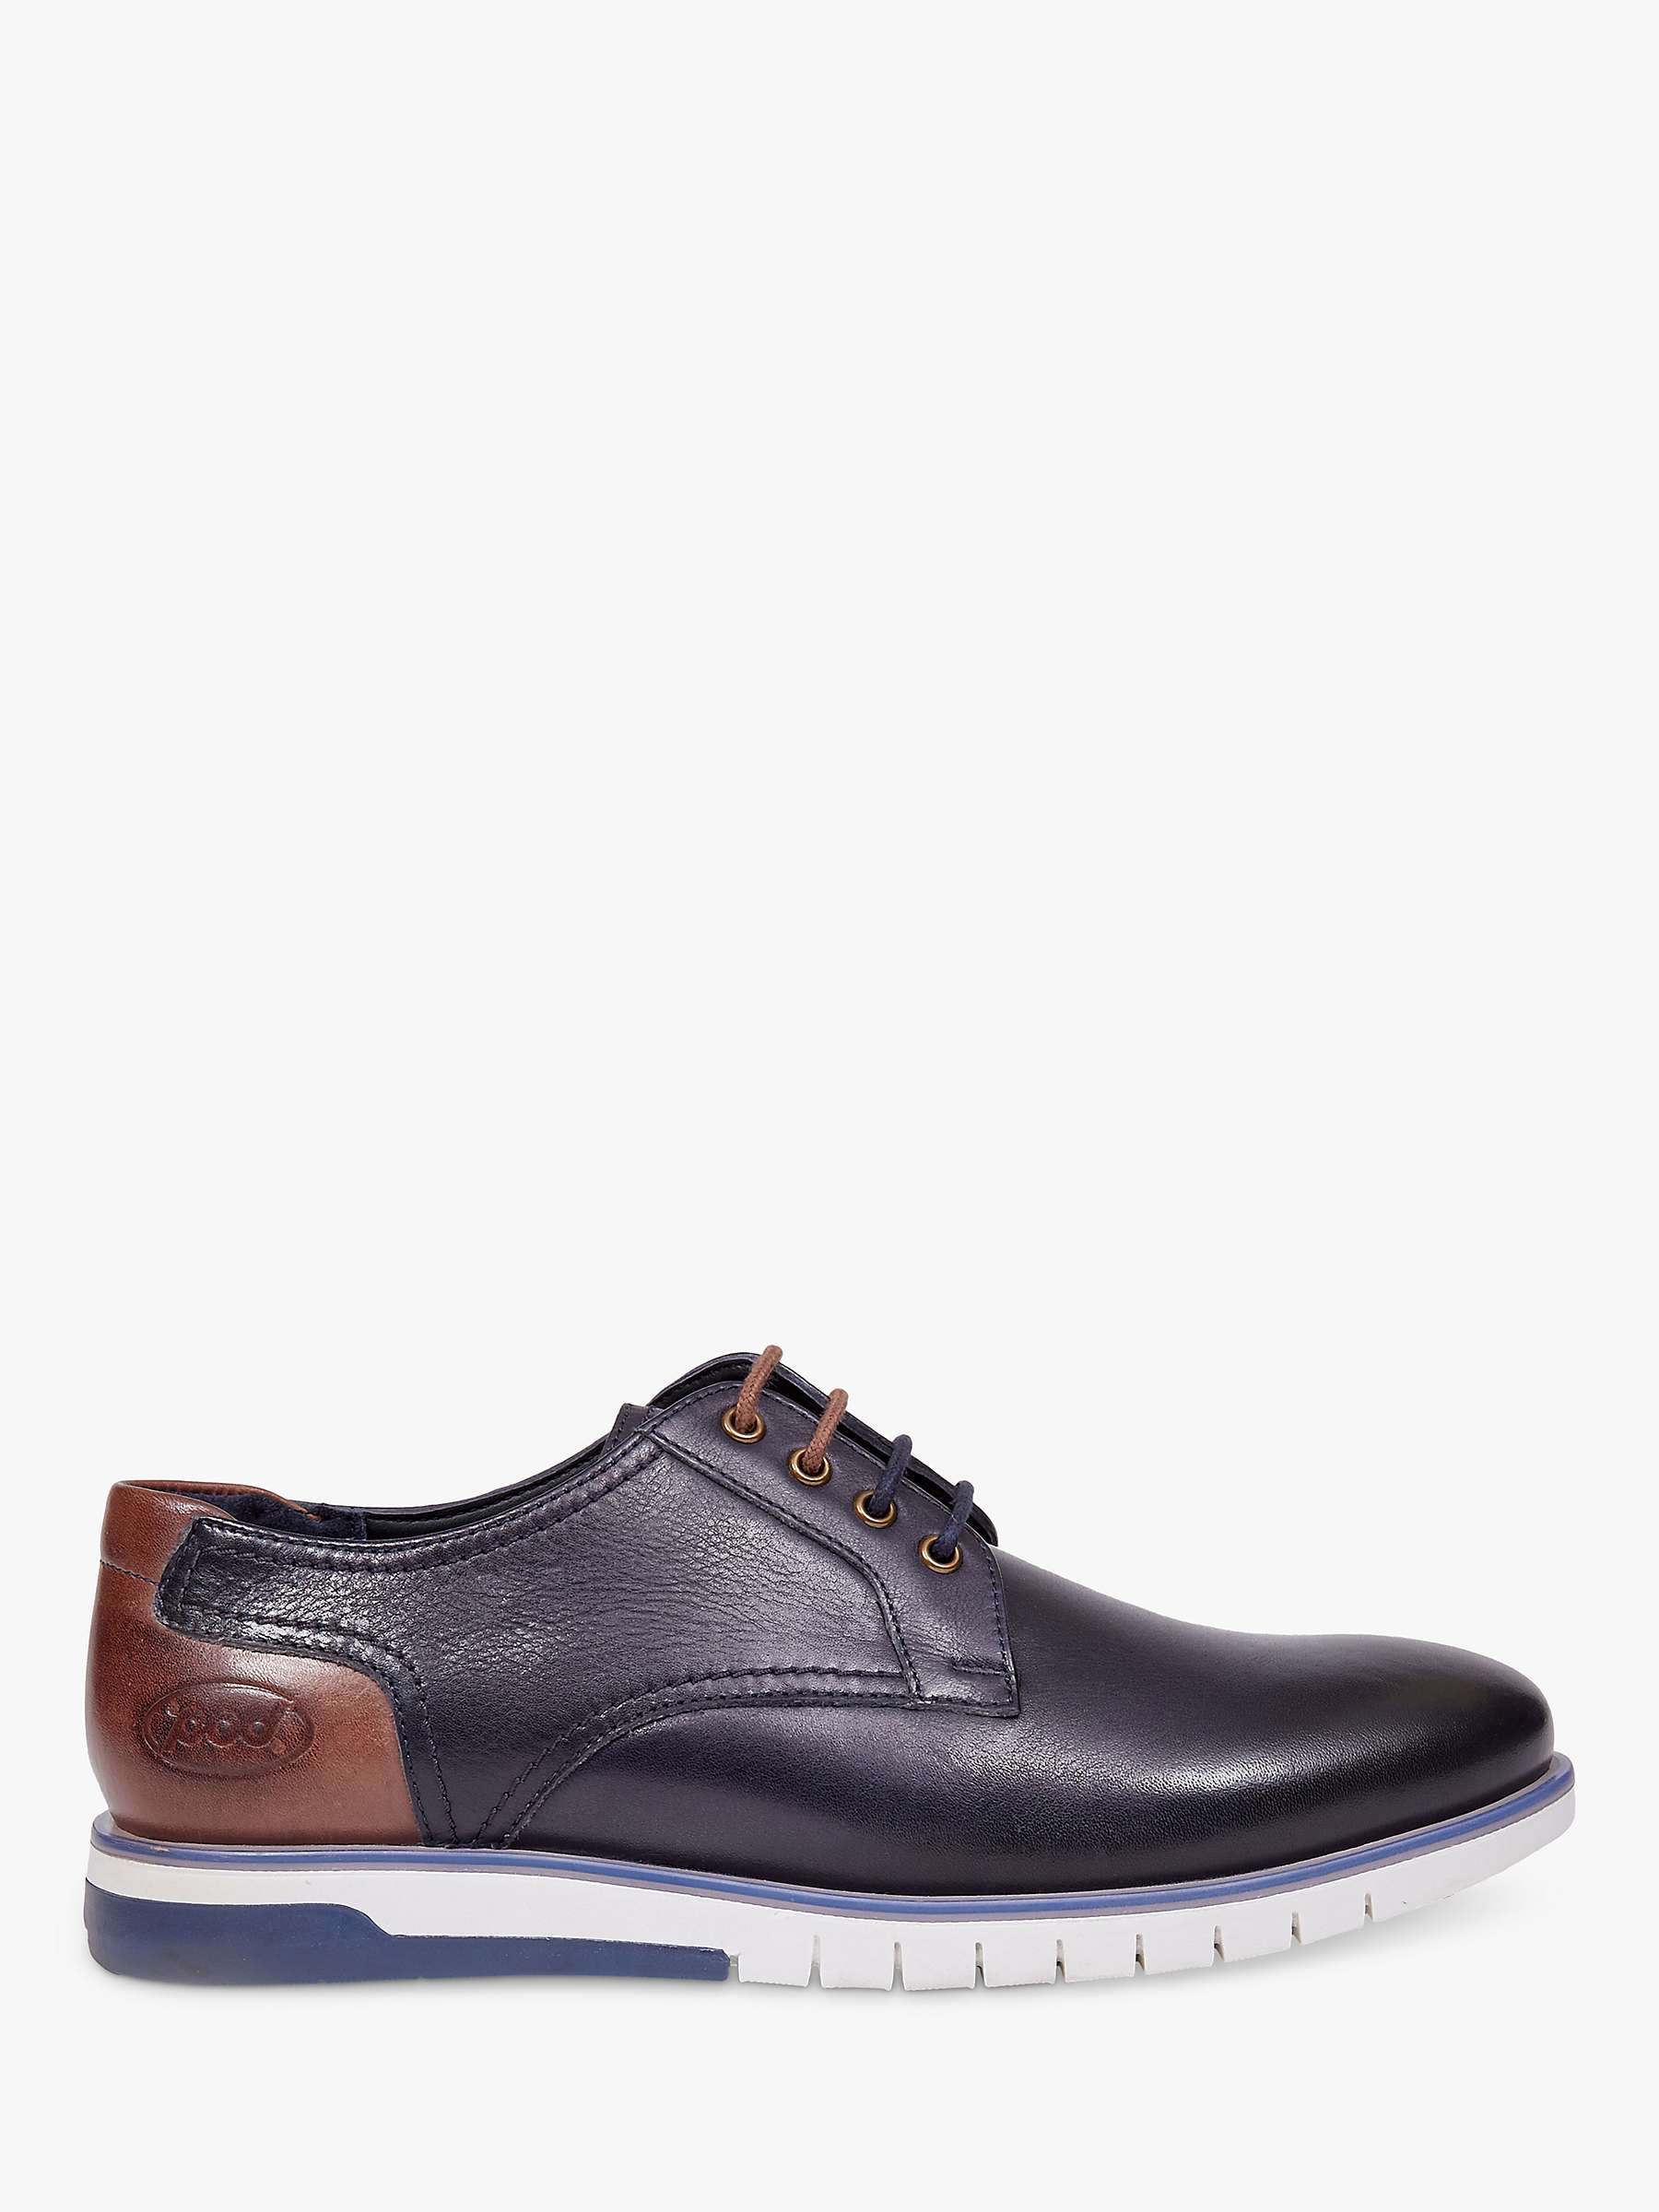 Pod Cillian Casual Leather Shoe, Navy at John Lewis & Partners